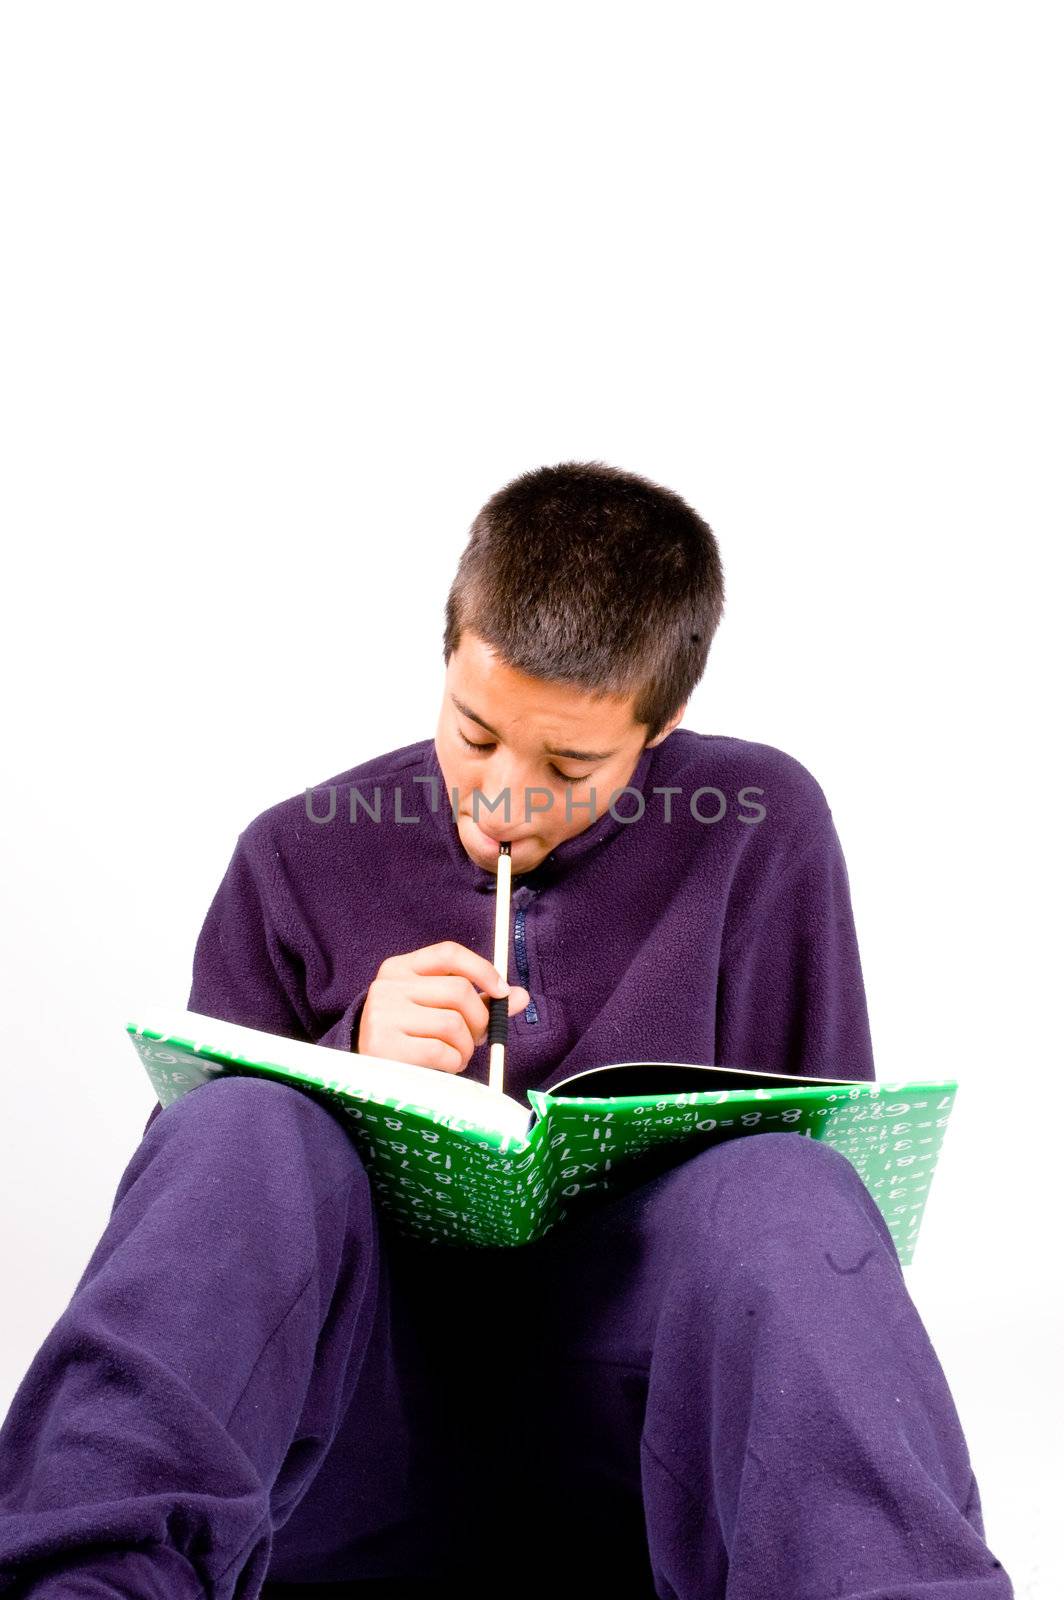 pakistan schoolboy is studying isolated on a white background